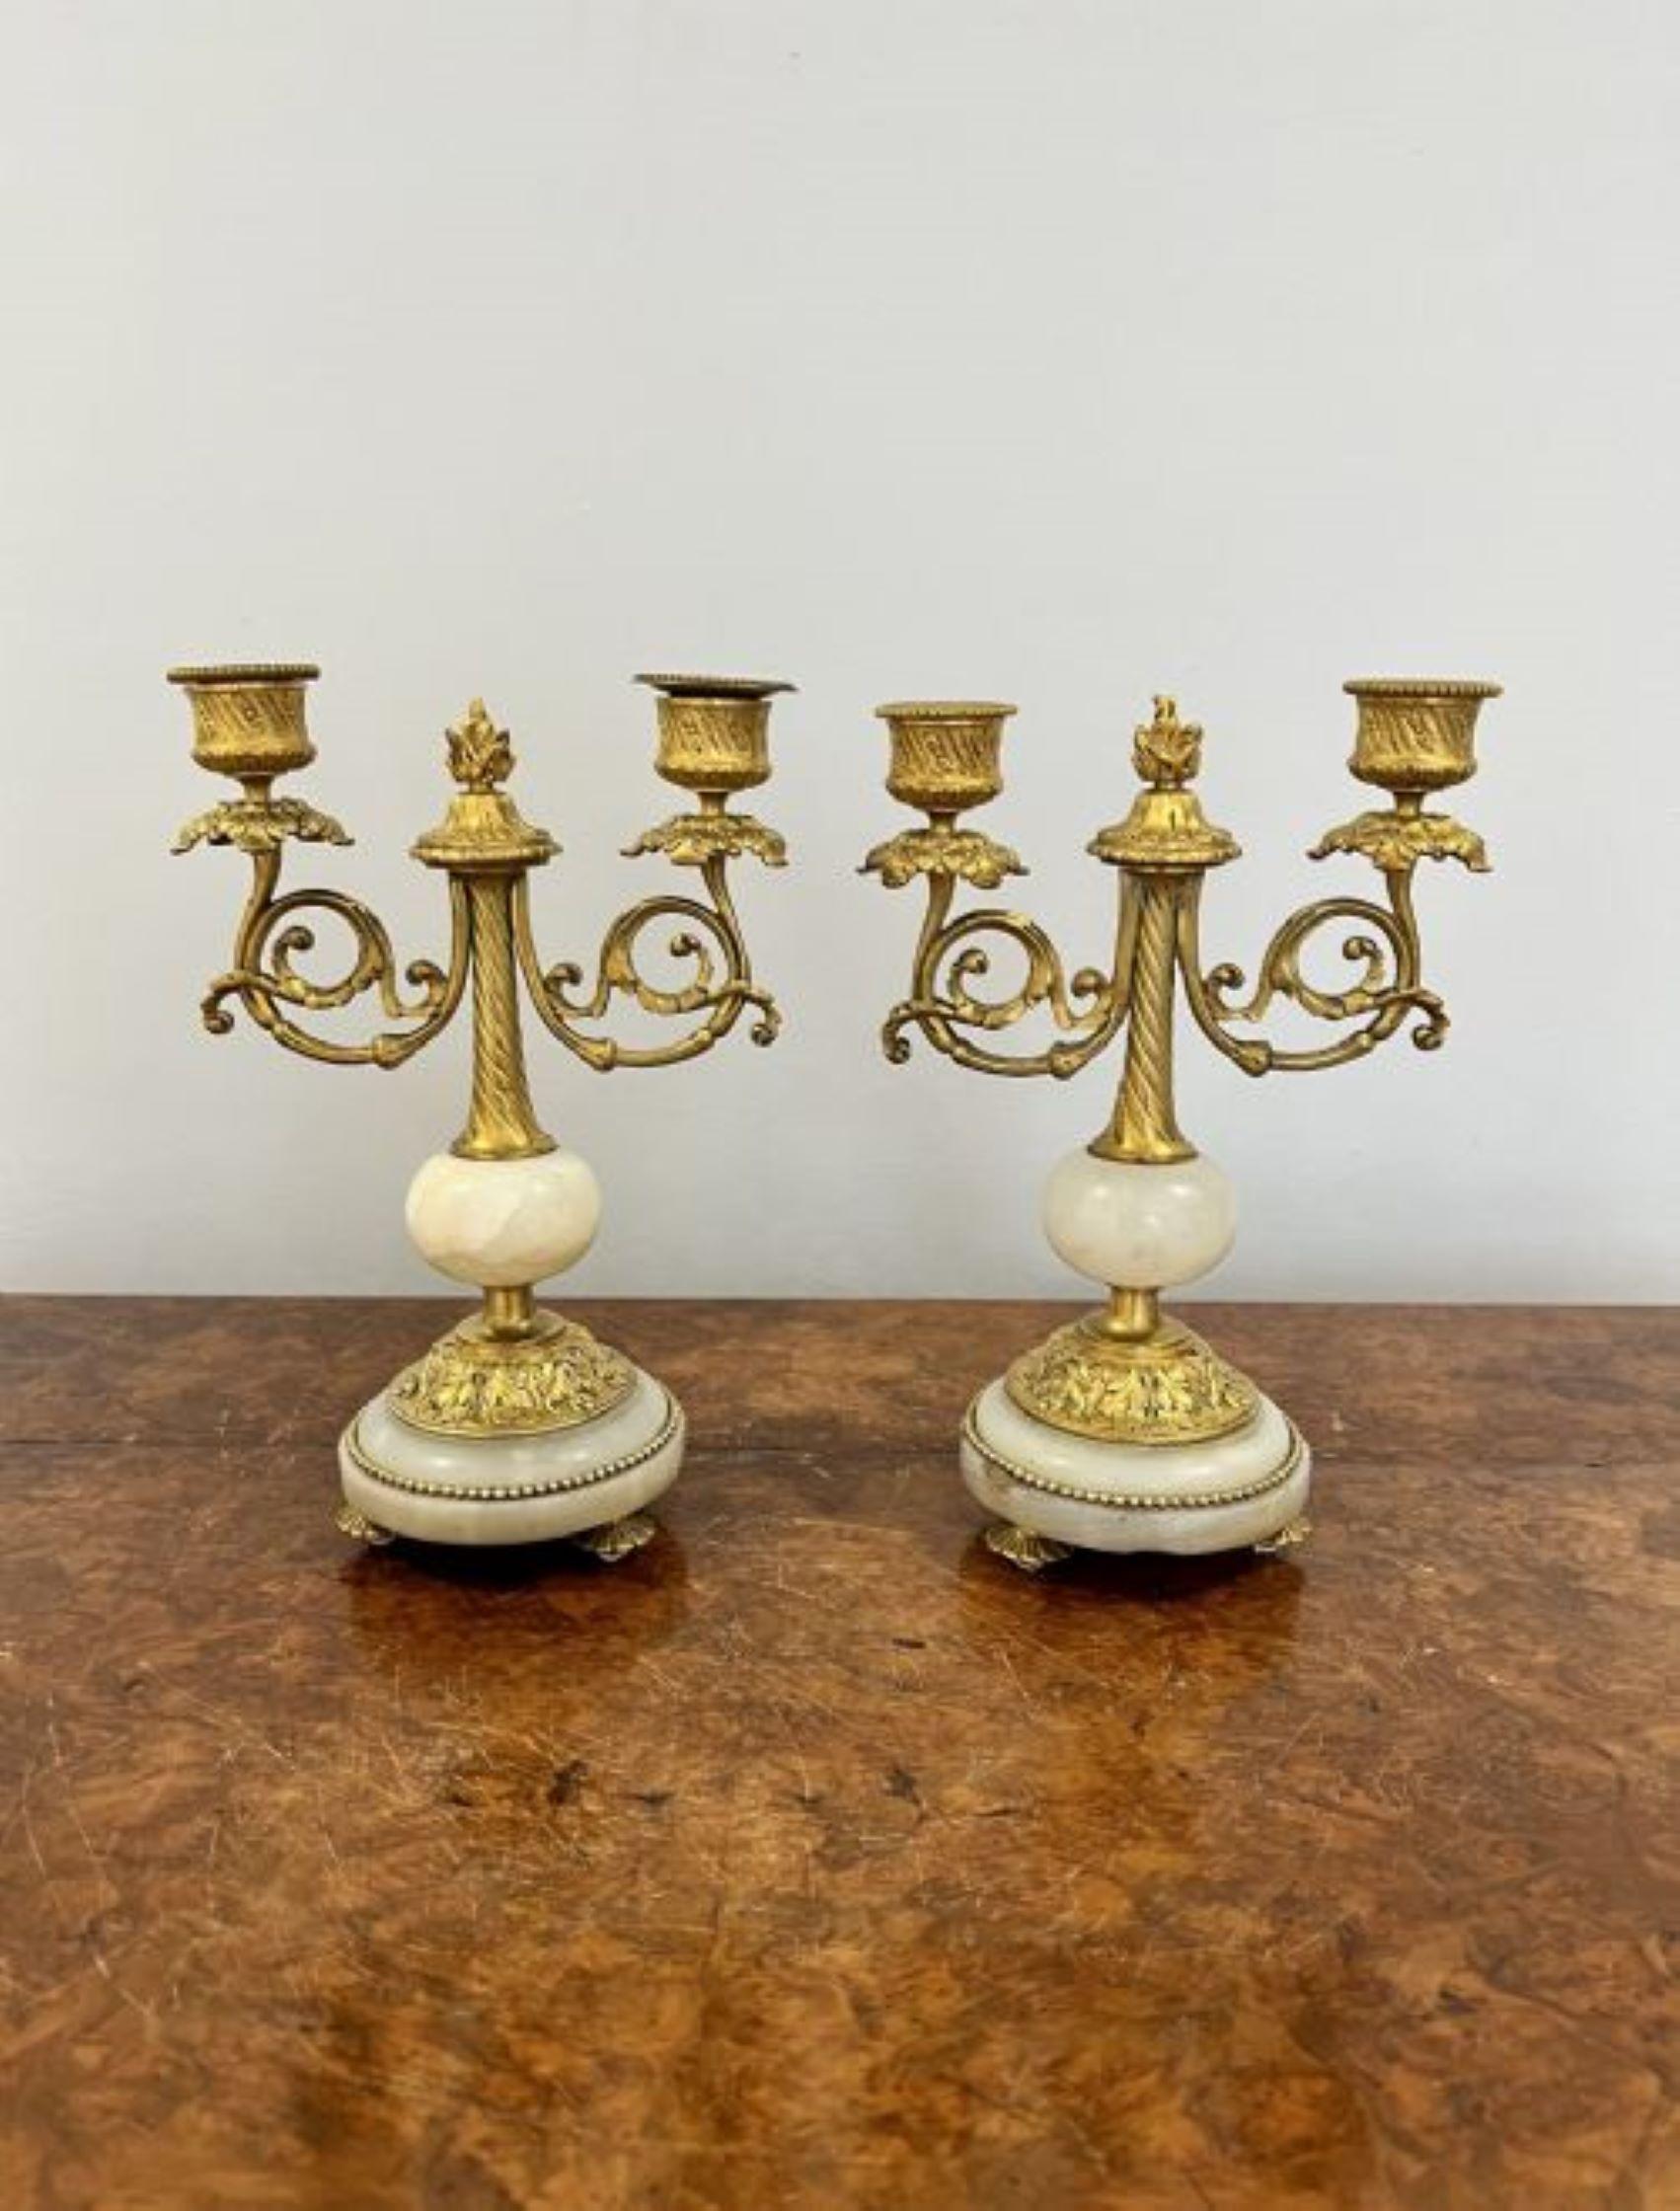 Pair of antique Victorian quality ormolu and marble candelabras having a quality pair of antique Victorian ormolu and white marble candelabra with two ornate branches standing on circular bases 